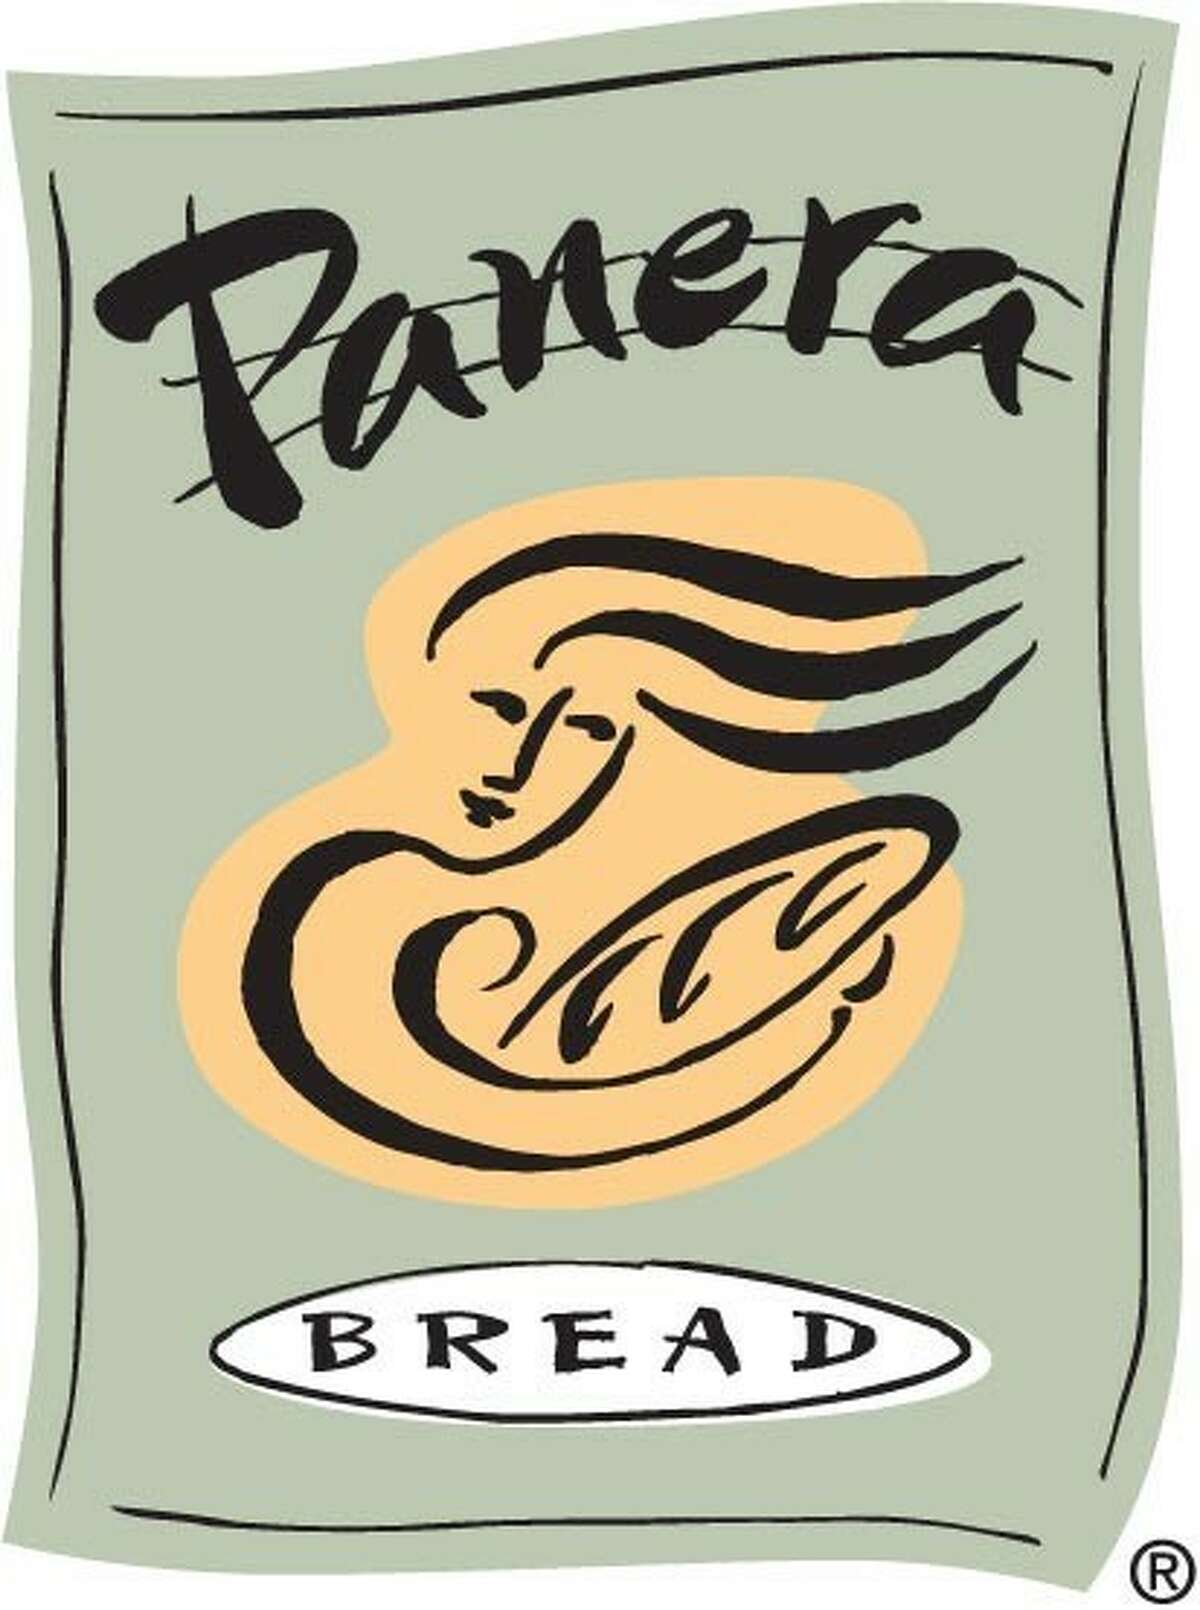 In an effort to support the Stay Family, all Panera Bread locations in the Greater Houston area will donate 20 percent of their sales on Aug. 12 from 2 p.m. to 8 p.m.